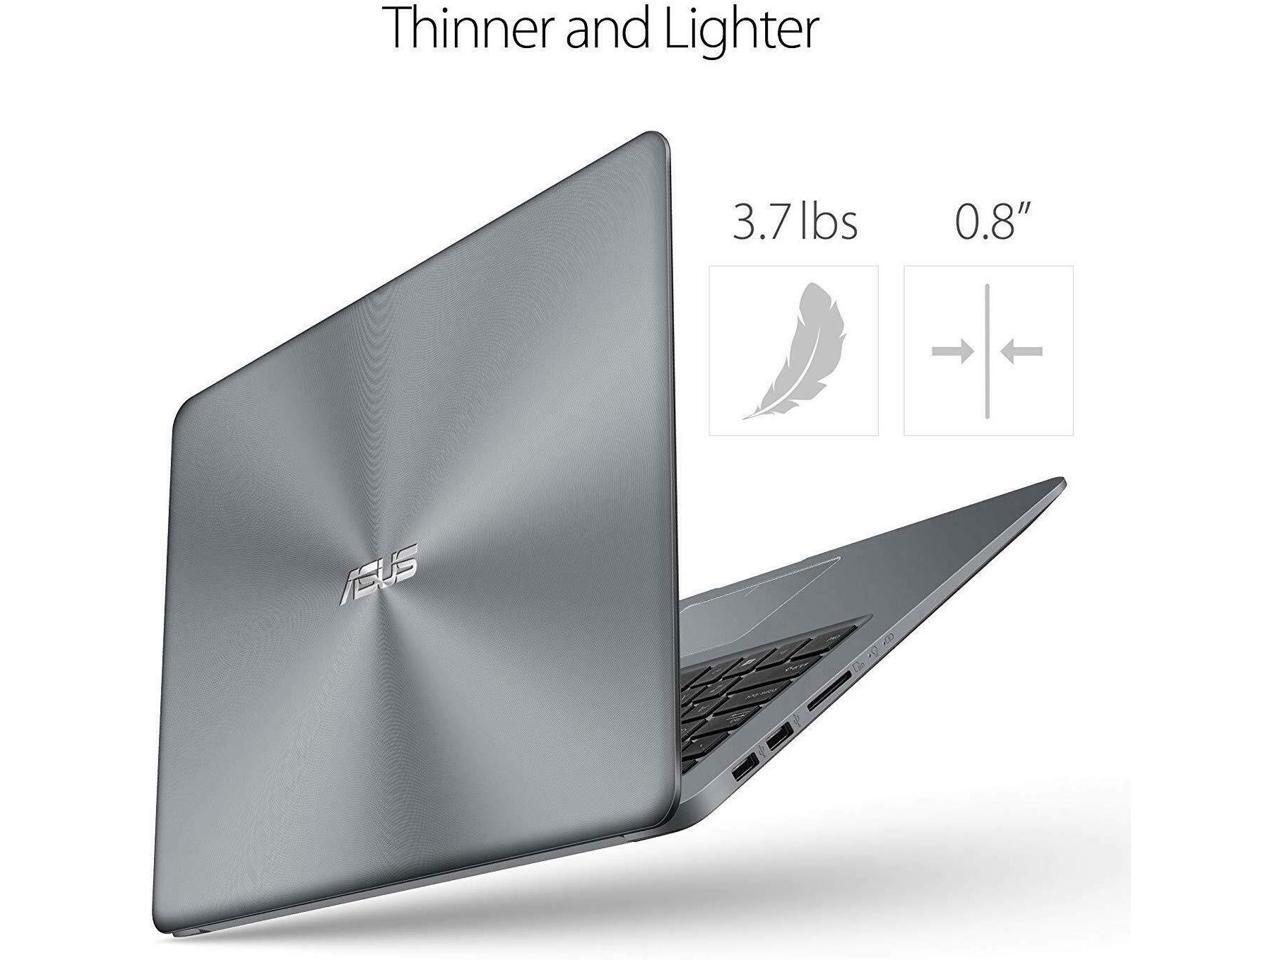 Newest Asus VivoBook Thin & Lightweight Laptop (8G DDR4/128G SSD+1TB HDD)|15.6" Full HD(1920x1080) WideView display| AMD Quad Core A12-9720P Processor| Wi-Fi |Fingerprint Reader|Windows 10 in S Mode